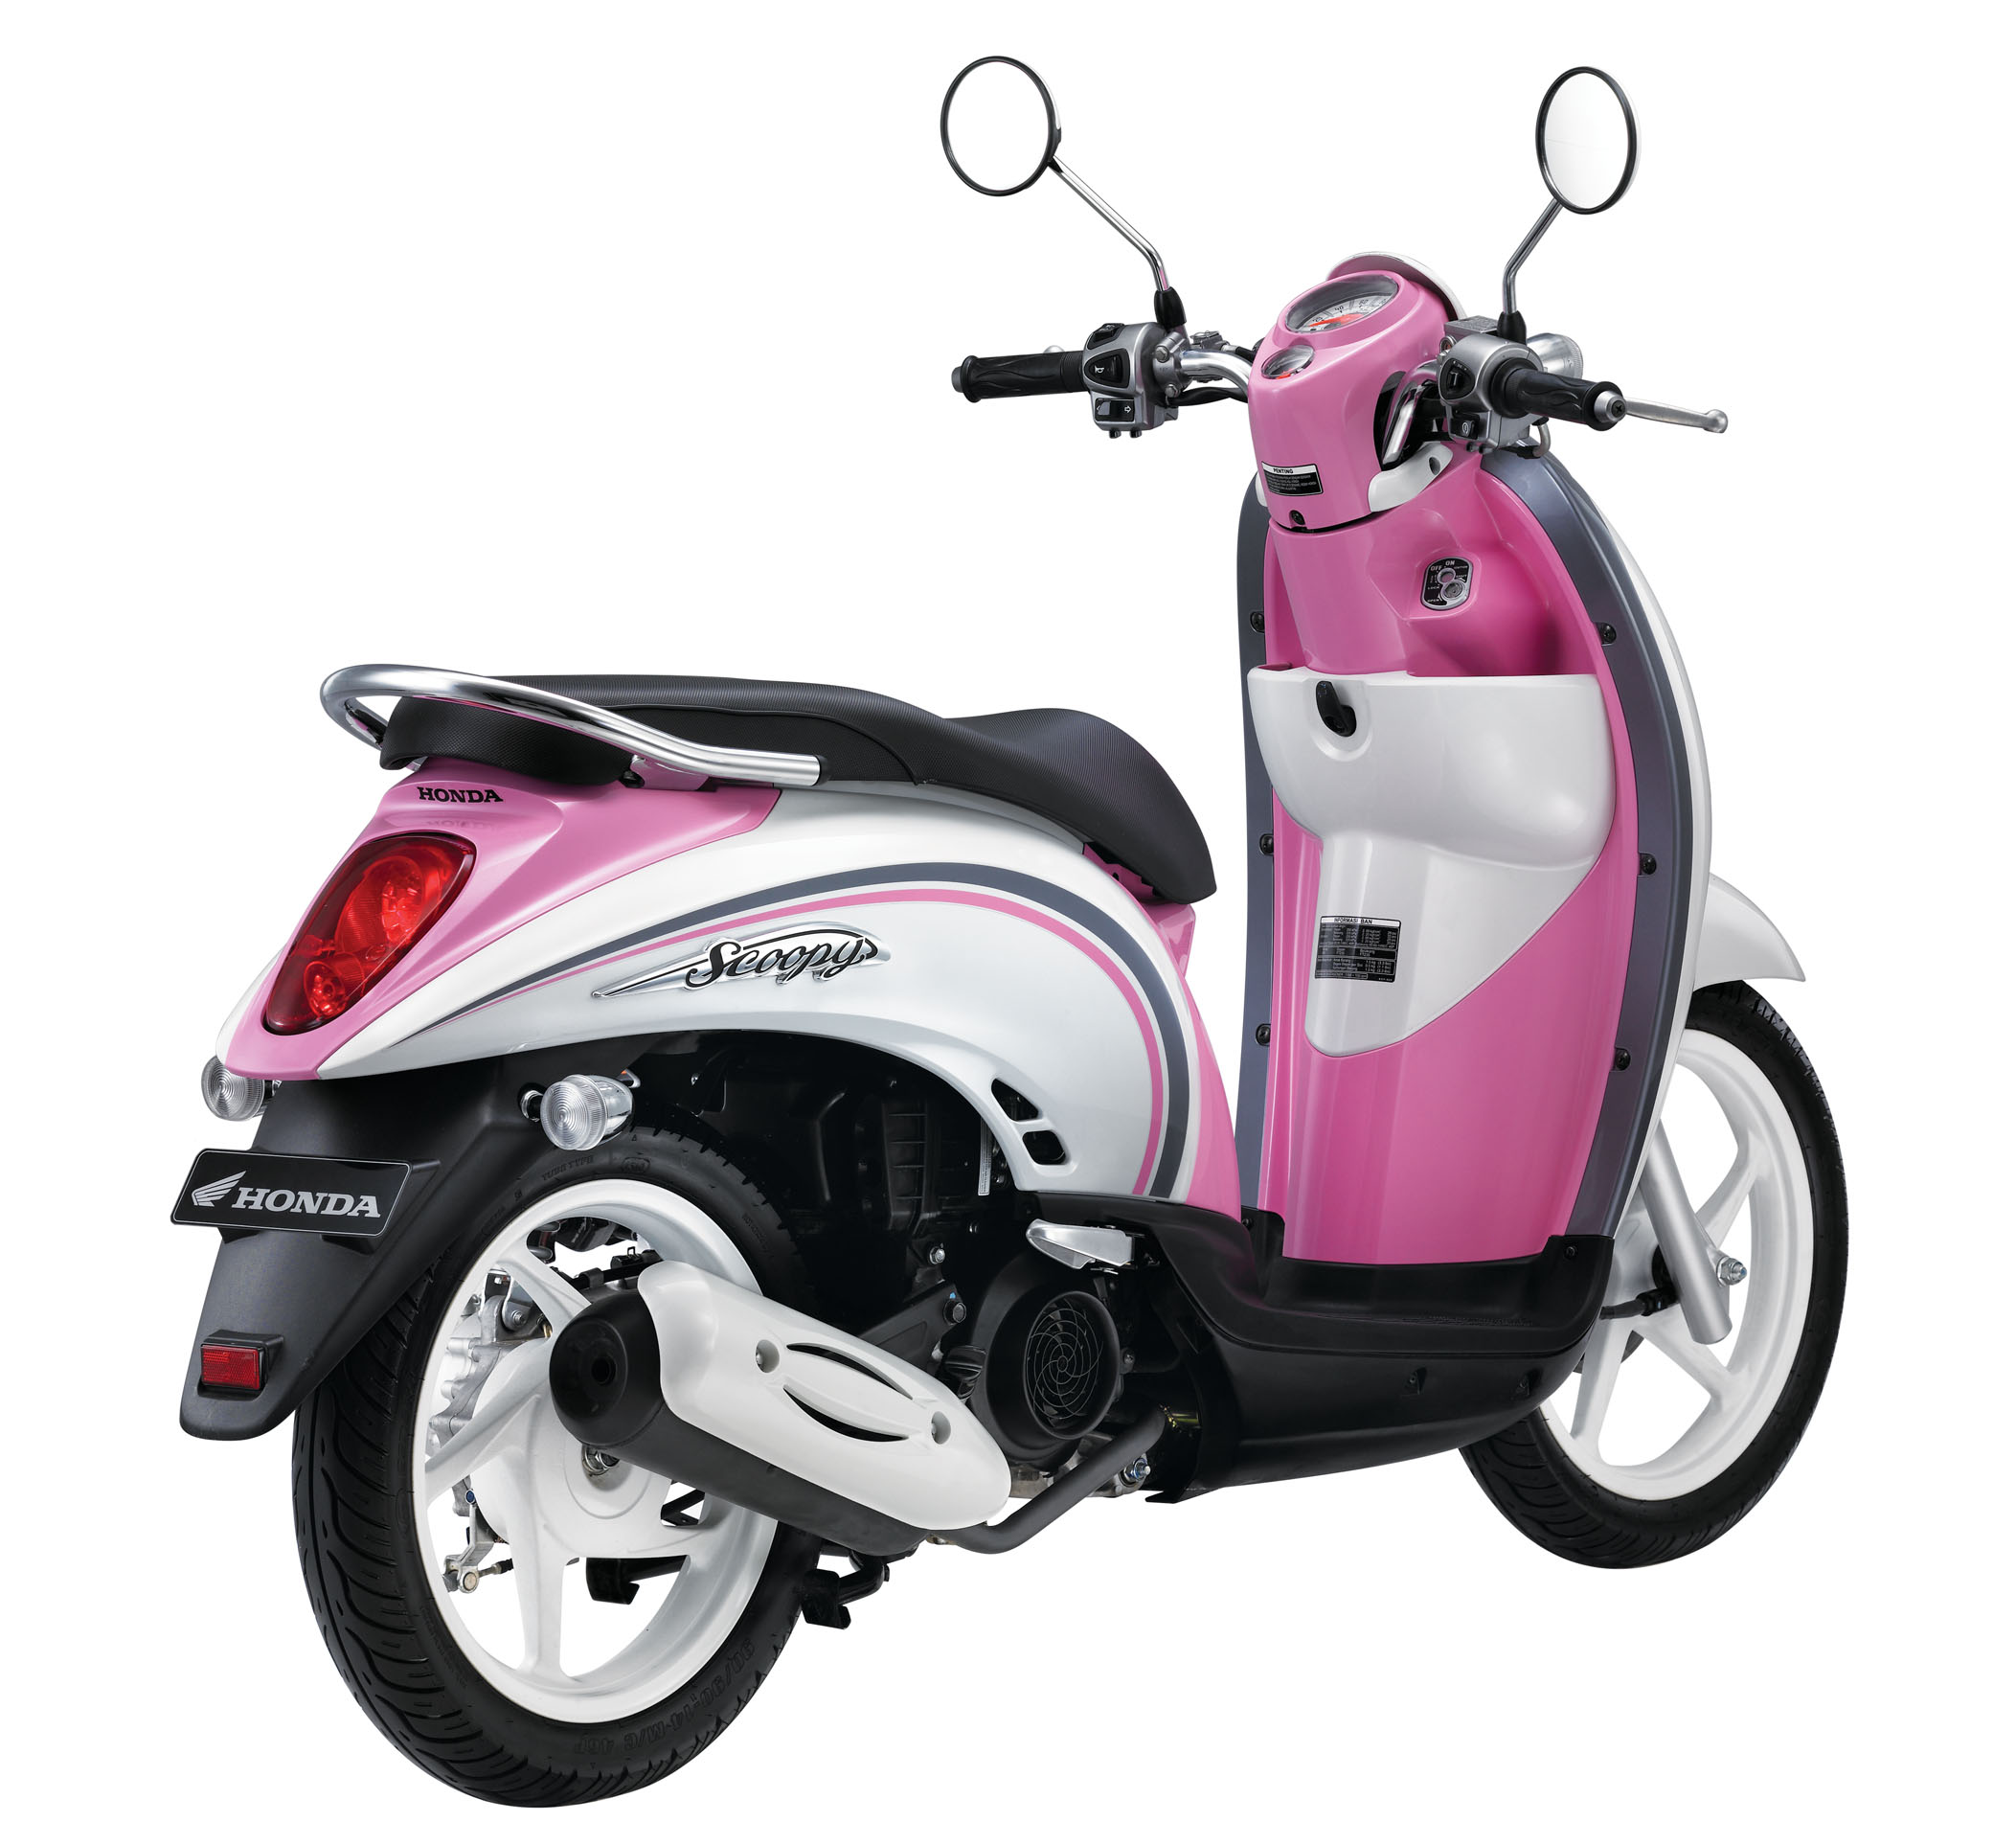 Motor Scoopy 2016 Review Motor Matic Scoopy FI Vogue Red Model